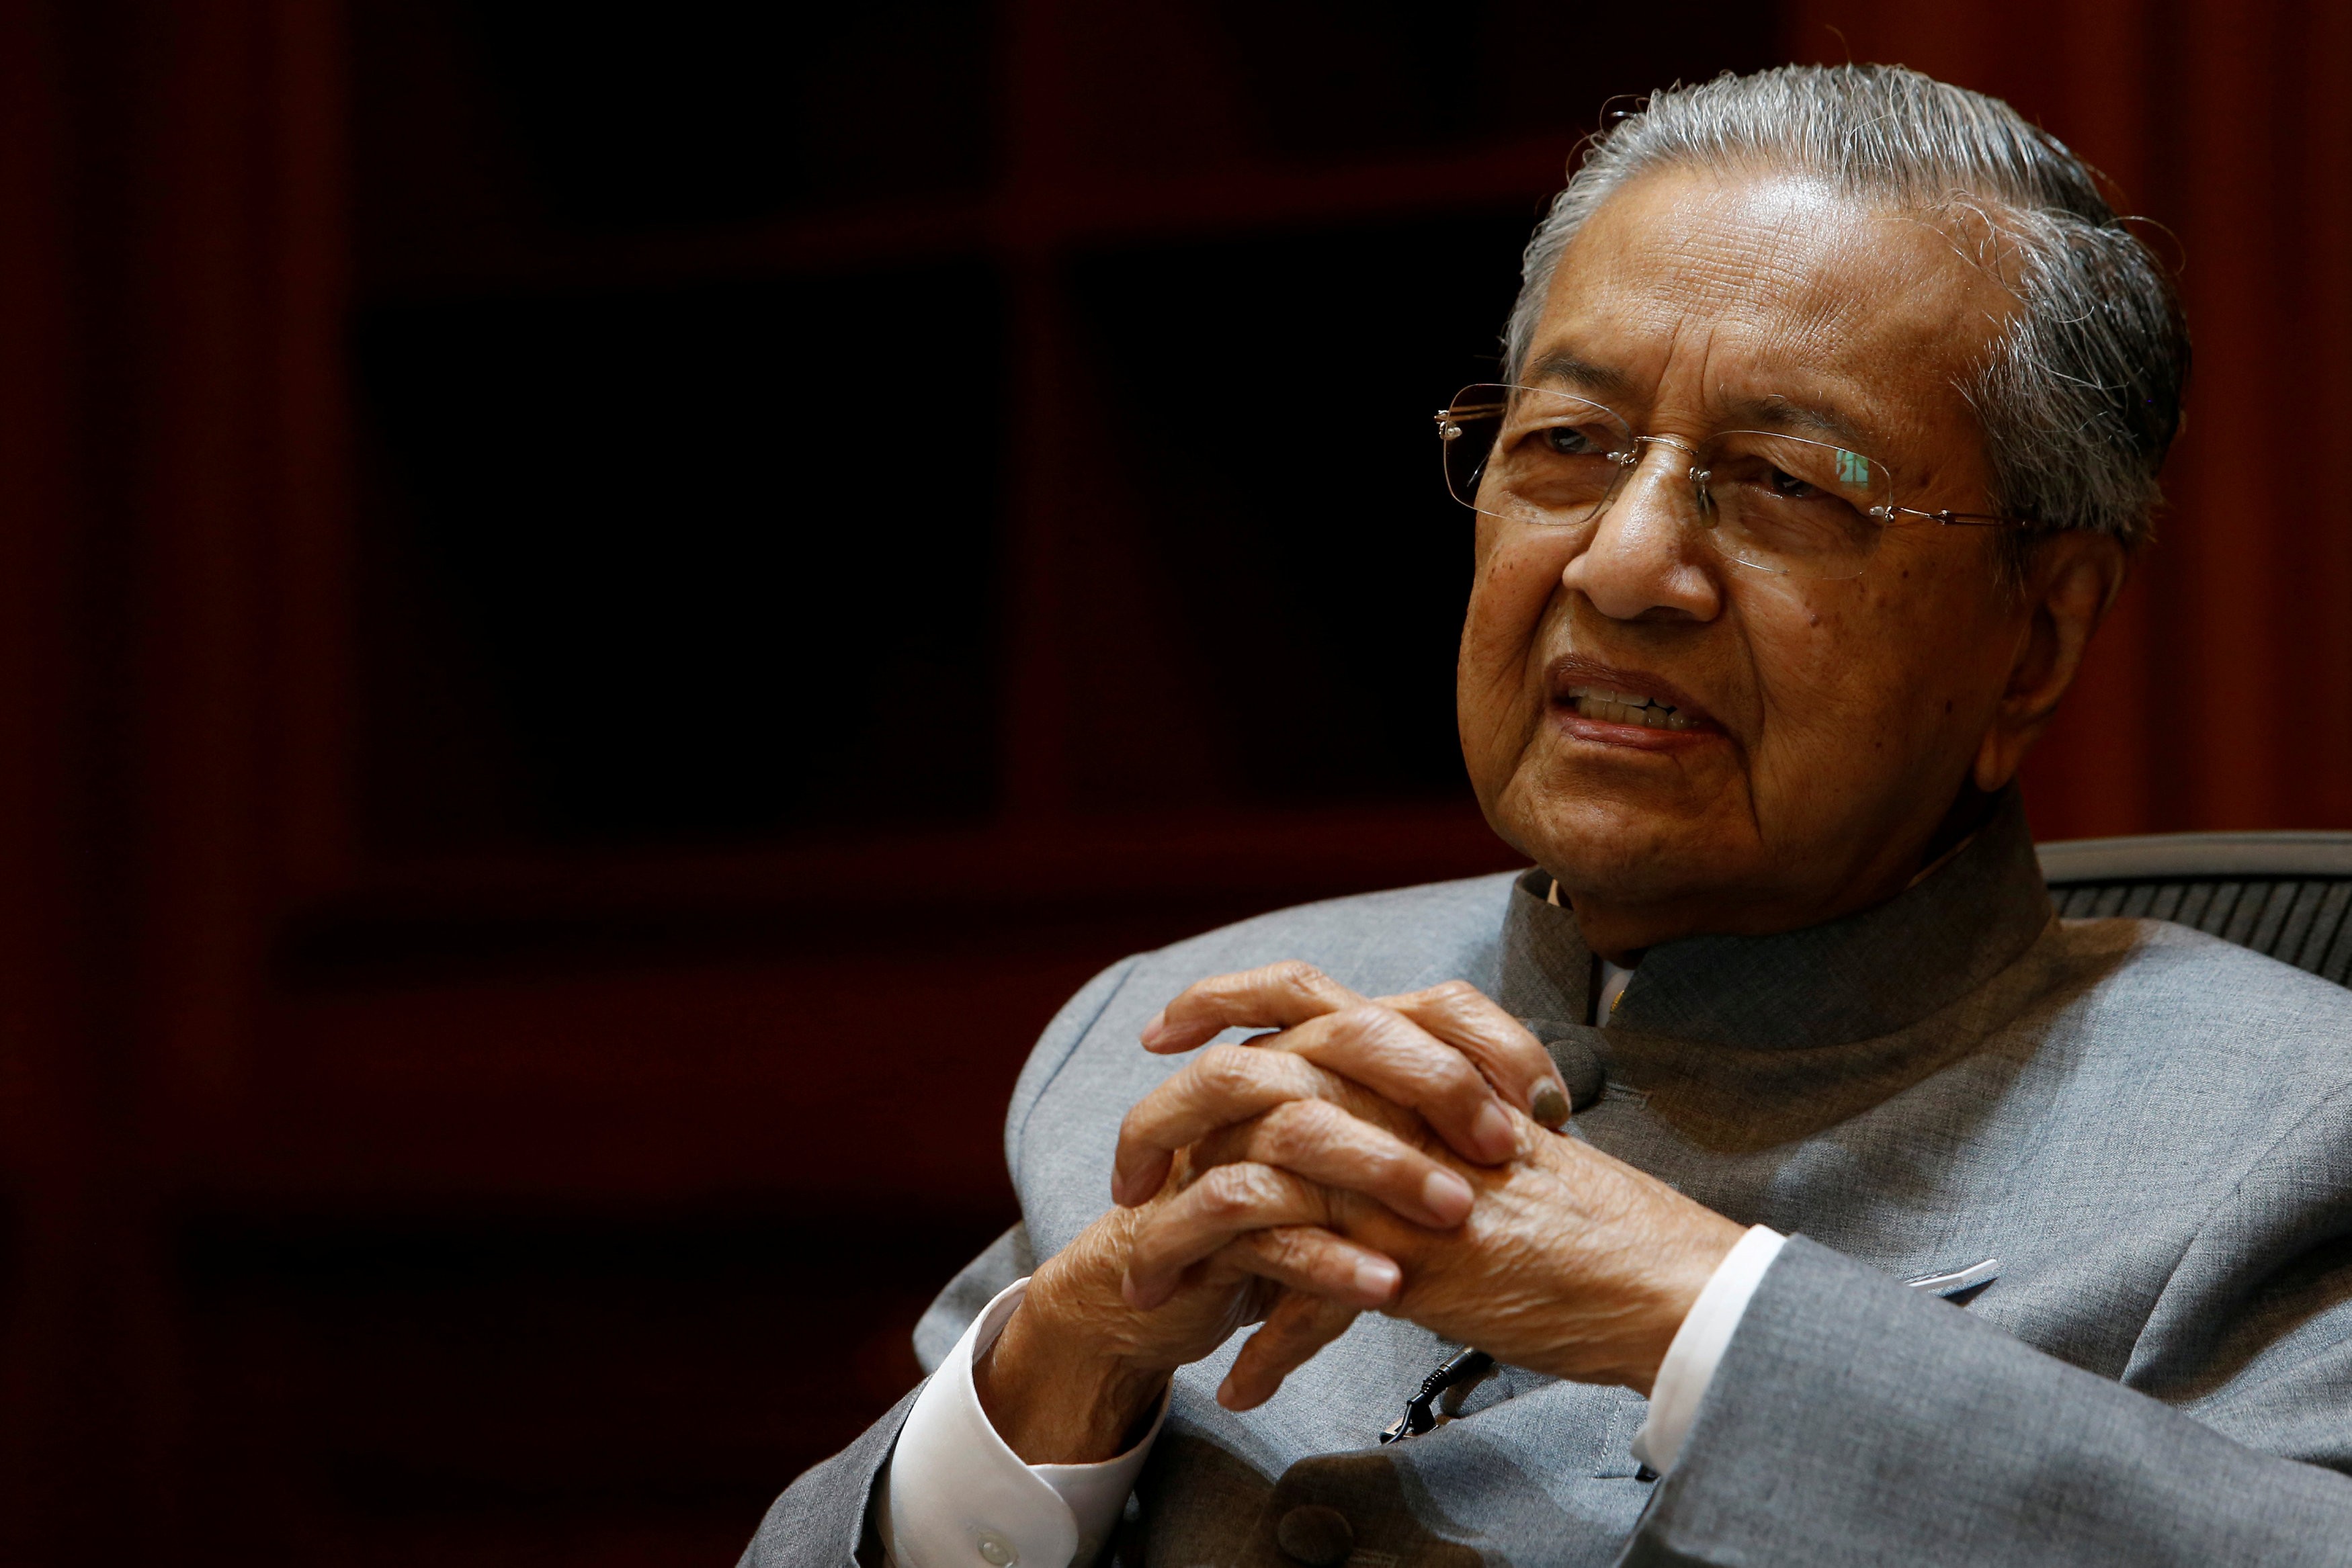 The thinking of Malaysia’s new prime minister – ‘Mahathir 2.0’ – offers an insight into weaker states’ views of the evolving Asian order in the Trump-Xi era and suggest a firmer stance on the South China Sea